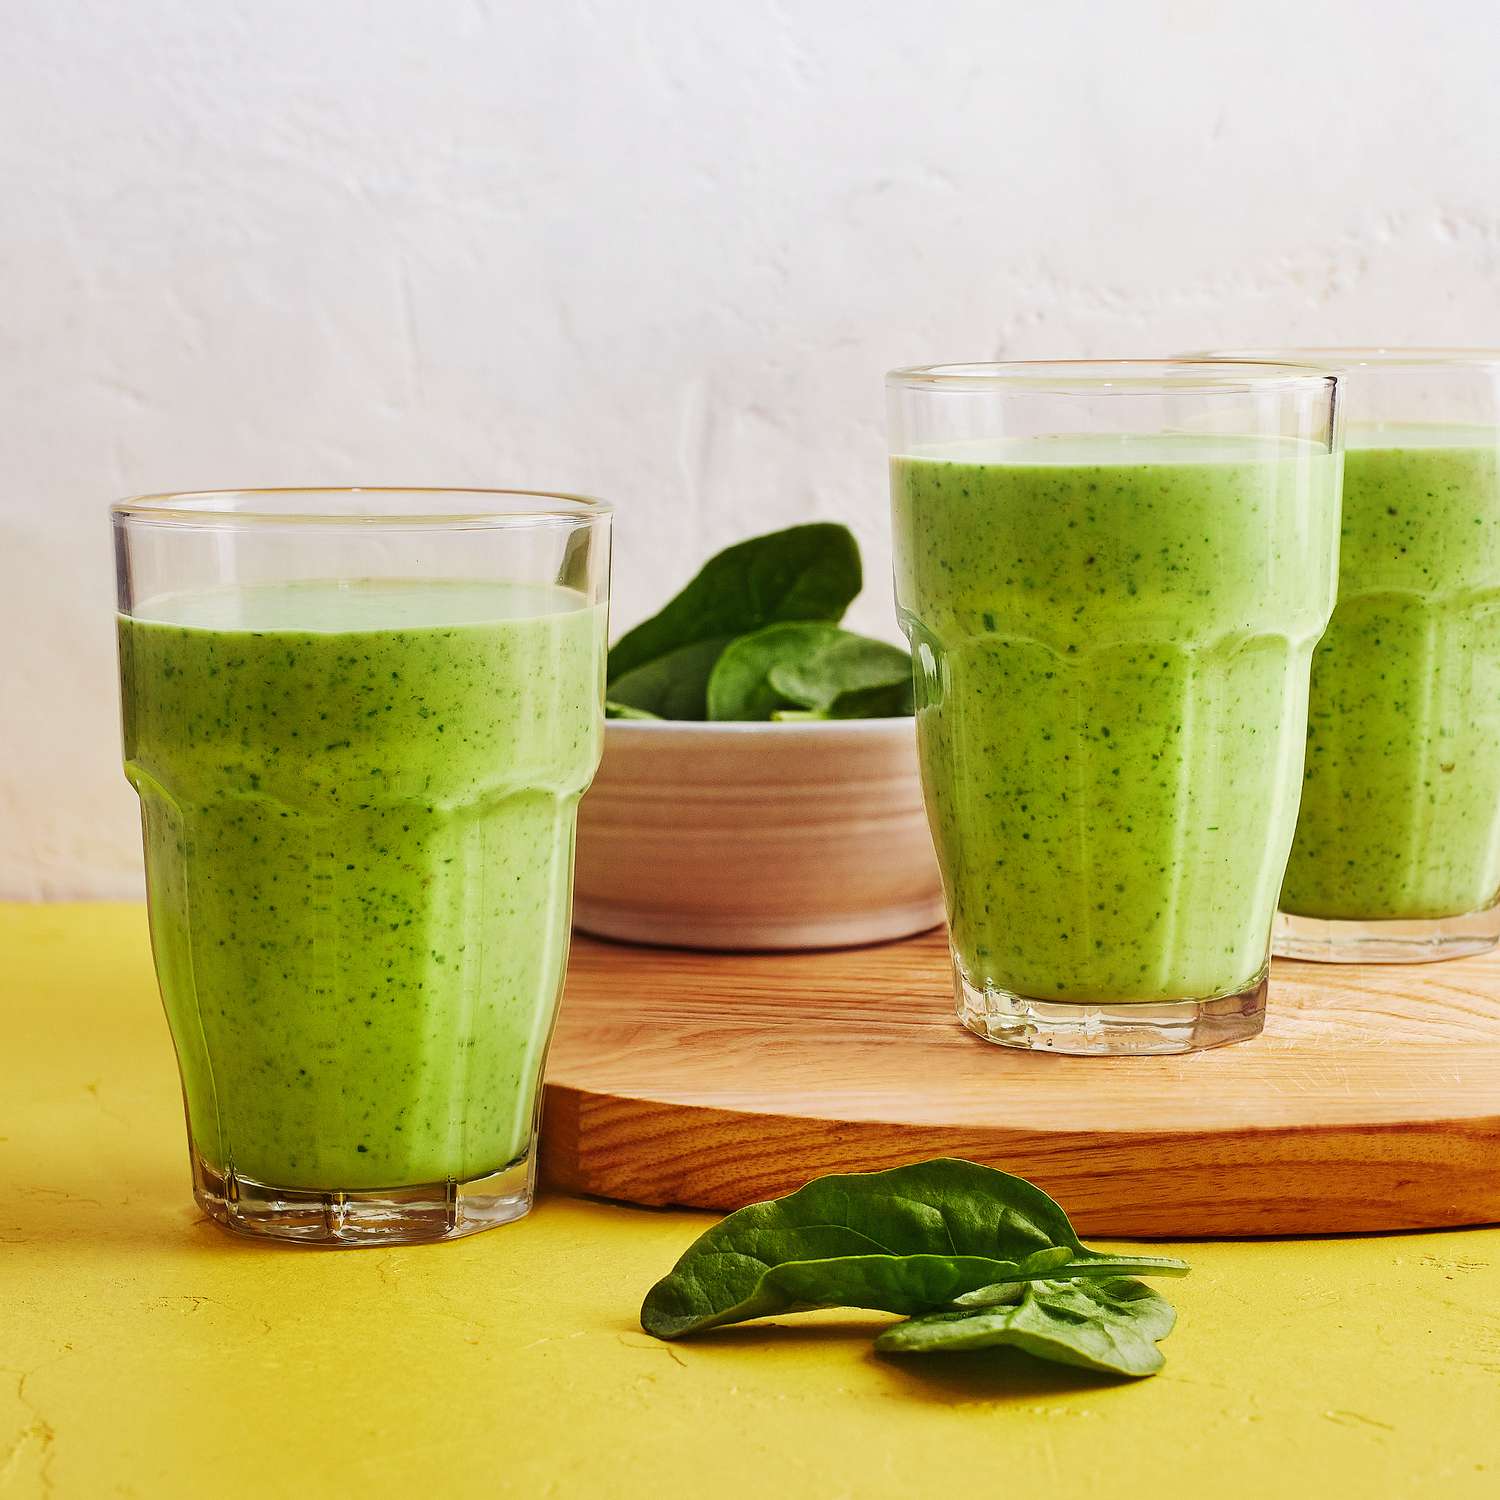 Spinach, Peanut Butter & Banana Smoothie